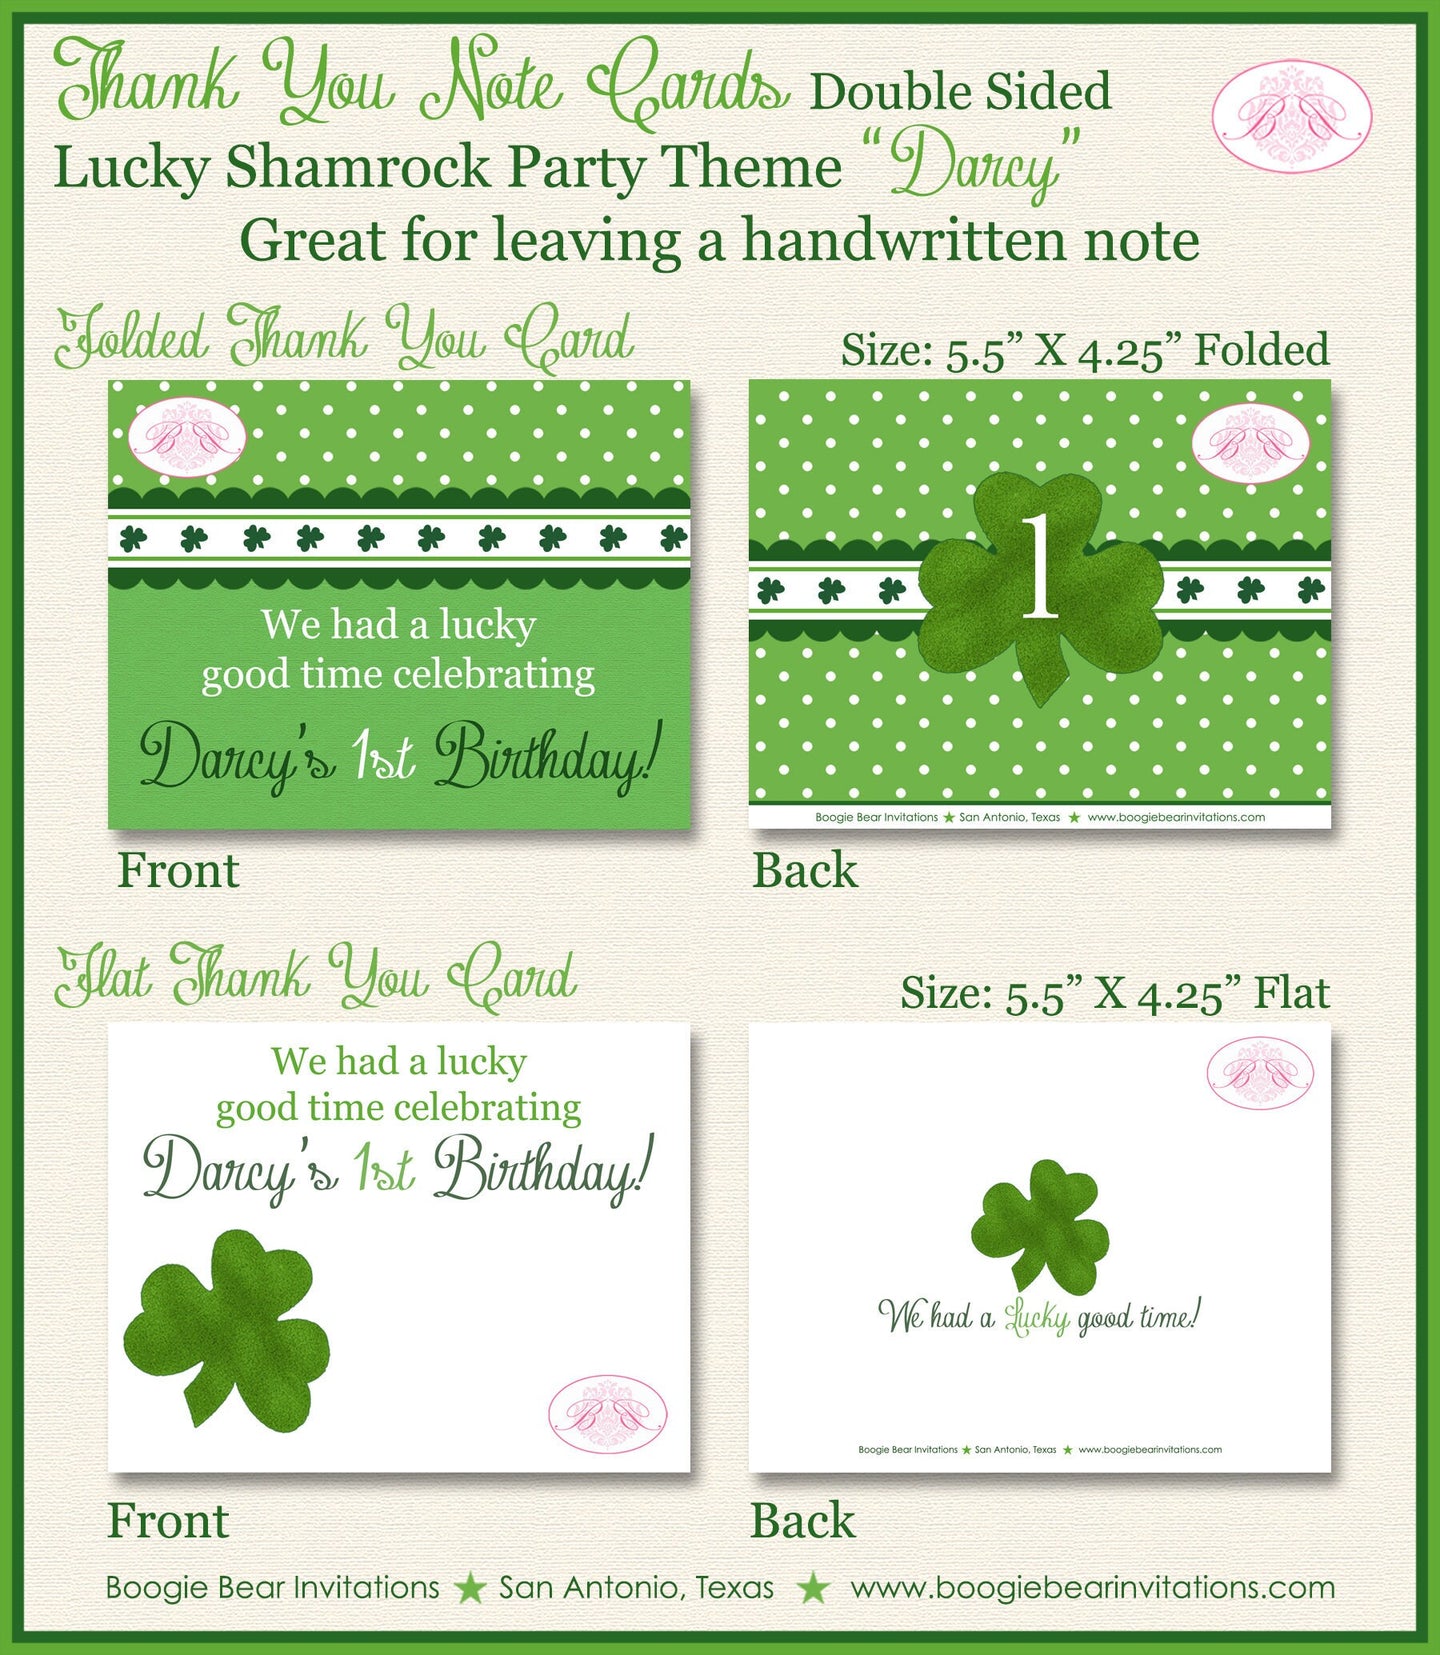 Green Shamrock Party Thank You Card Birthday St. Patrick's Day Lucky Charm Clover Spring 4 Leaf Boy Girl Boogie Bear Invitations Darcy Theme